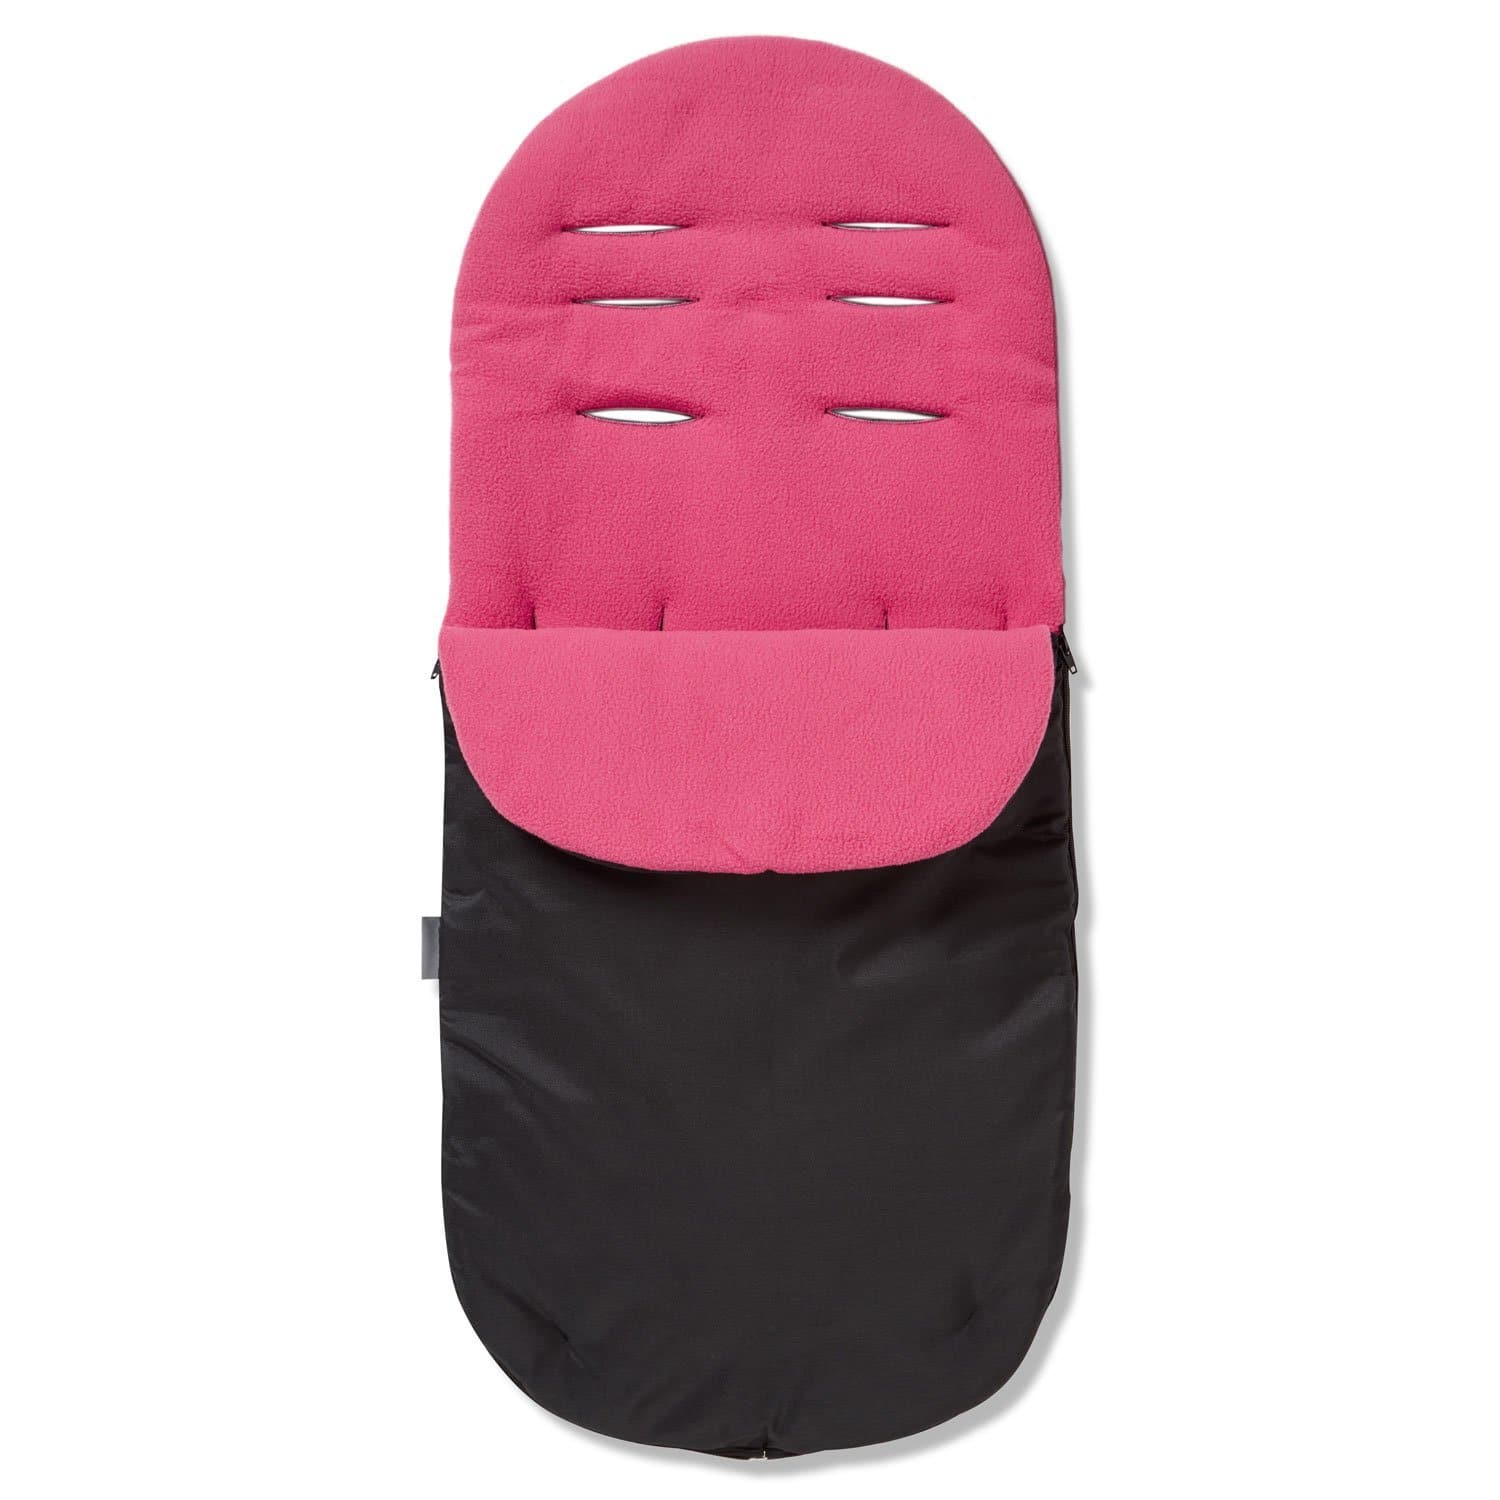 Footmuff / Cosy Toes Compatible with Baby Trend - Dark Pink / Fits All Models | For Your Little One